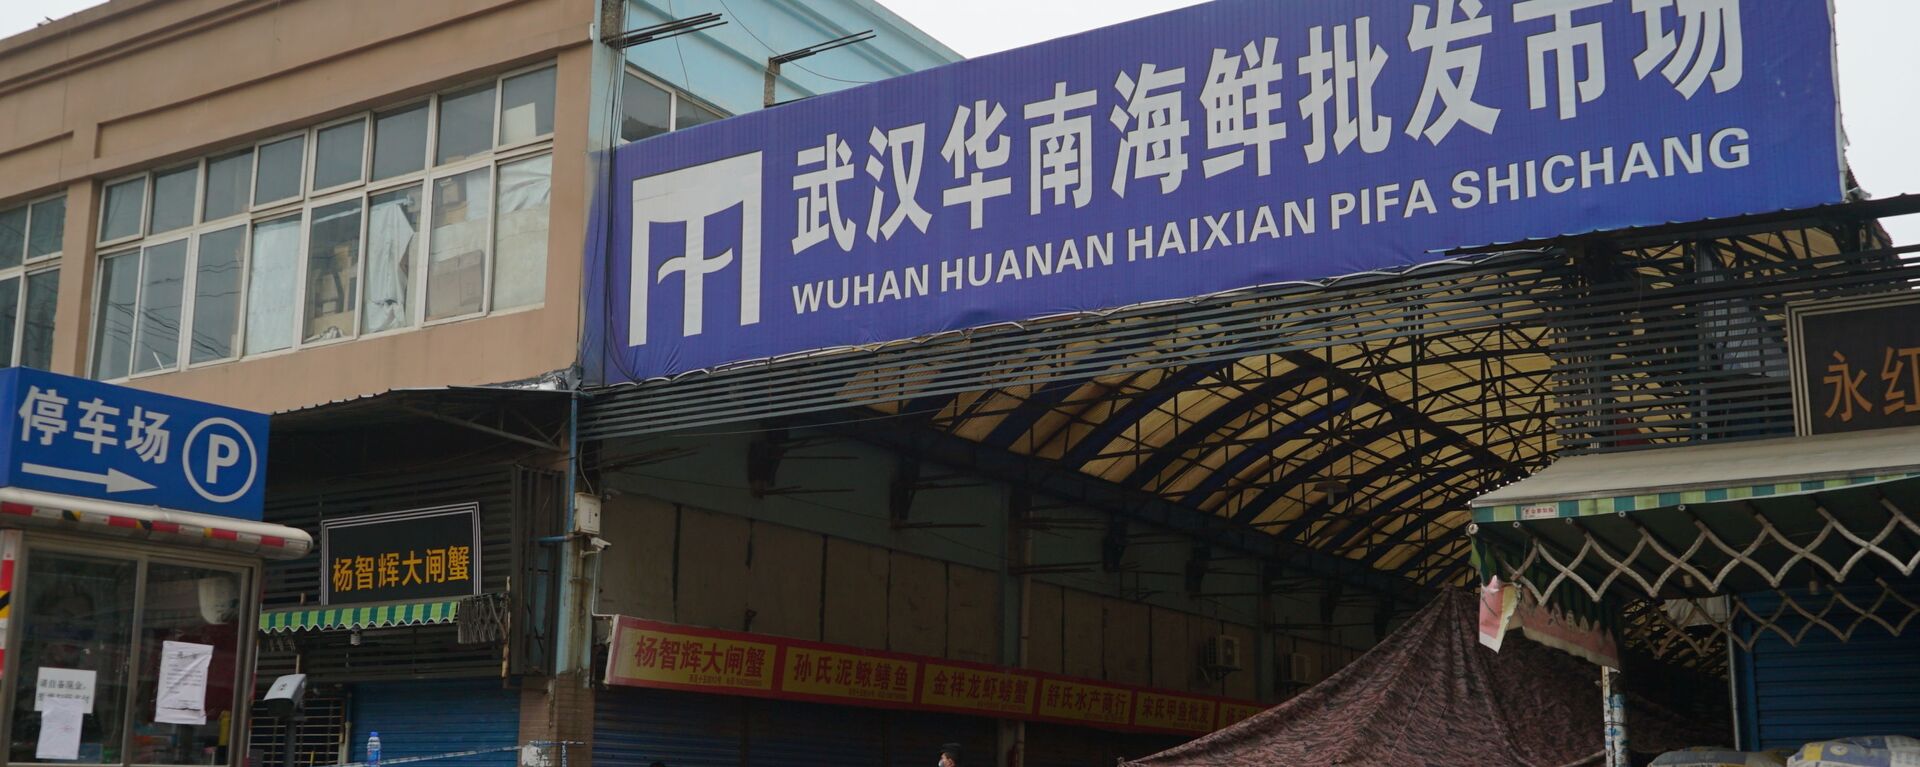 The Wuhan Huanan Wholesale Seafood Market, where a number of people related to the market fell ill with a virus, sits closed in Wuhan, China, Tuesday, Jan. 21, 2020. - Sputnik International, 1920, 28.05.2021